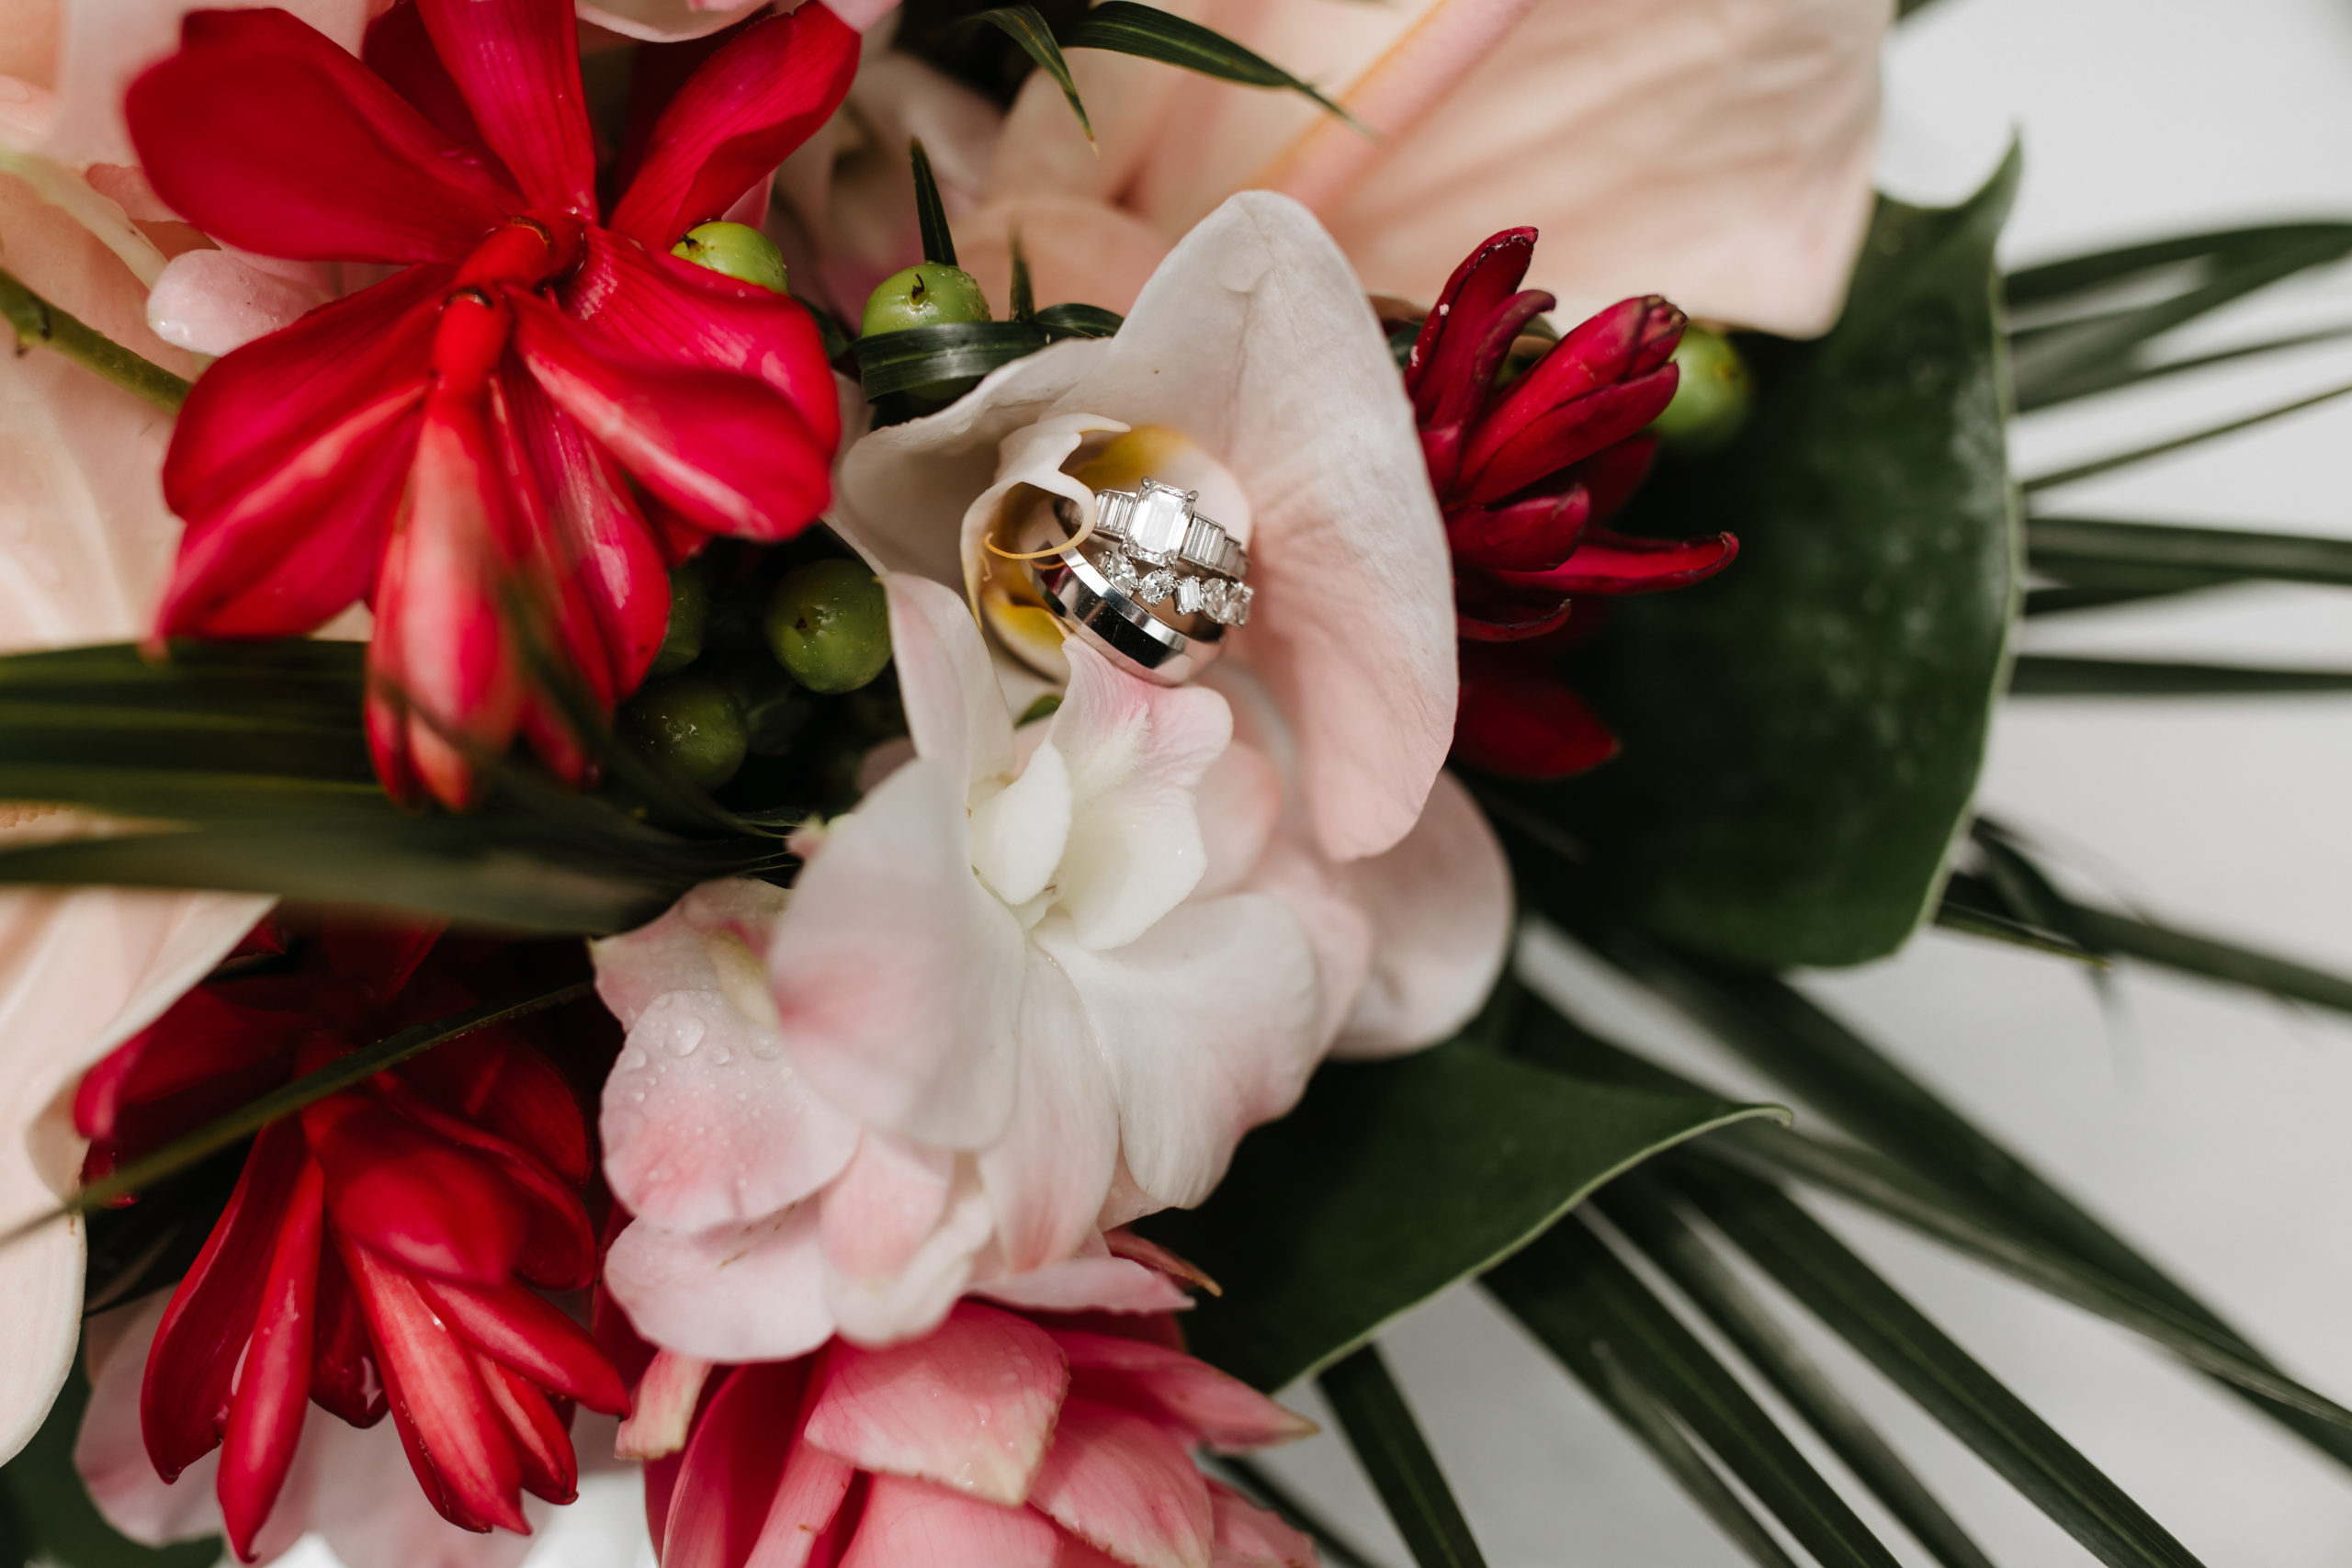 the details of the rings and the wedding flowers